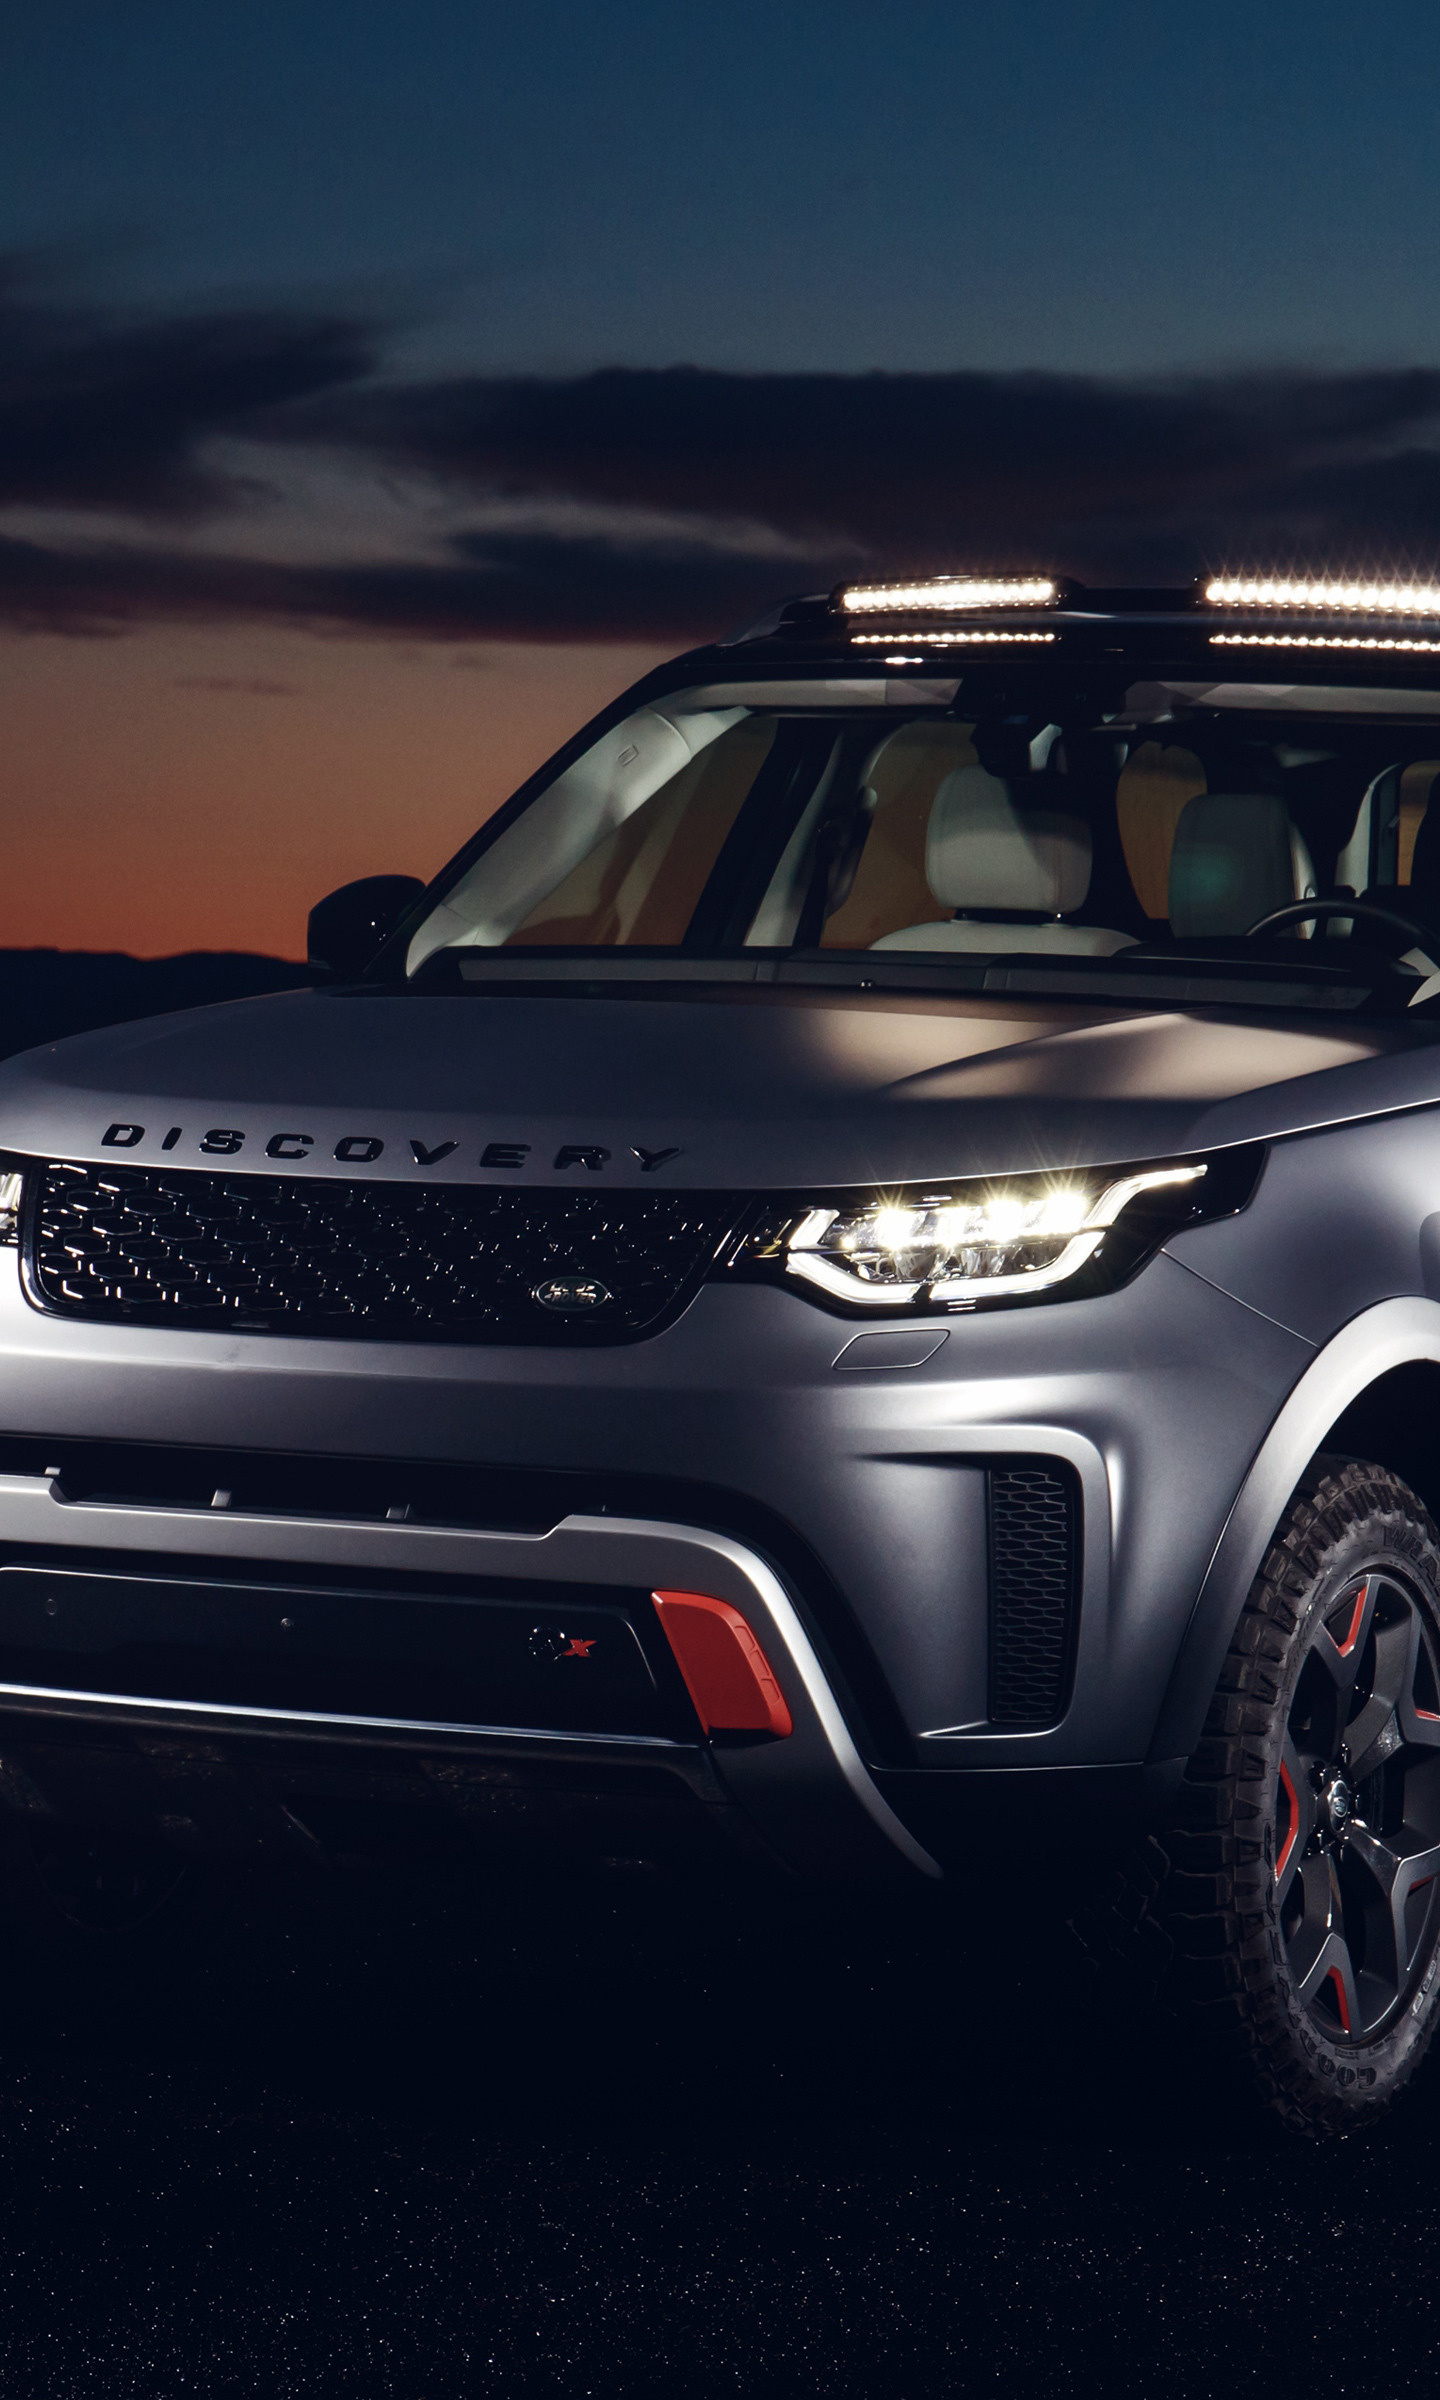 Land Rover Discovery, SVX SUV, High-resolution wallpaper, Mobile download, 1440x2400 HD Phone